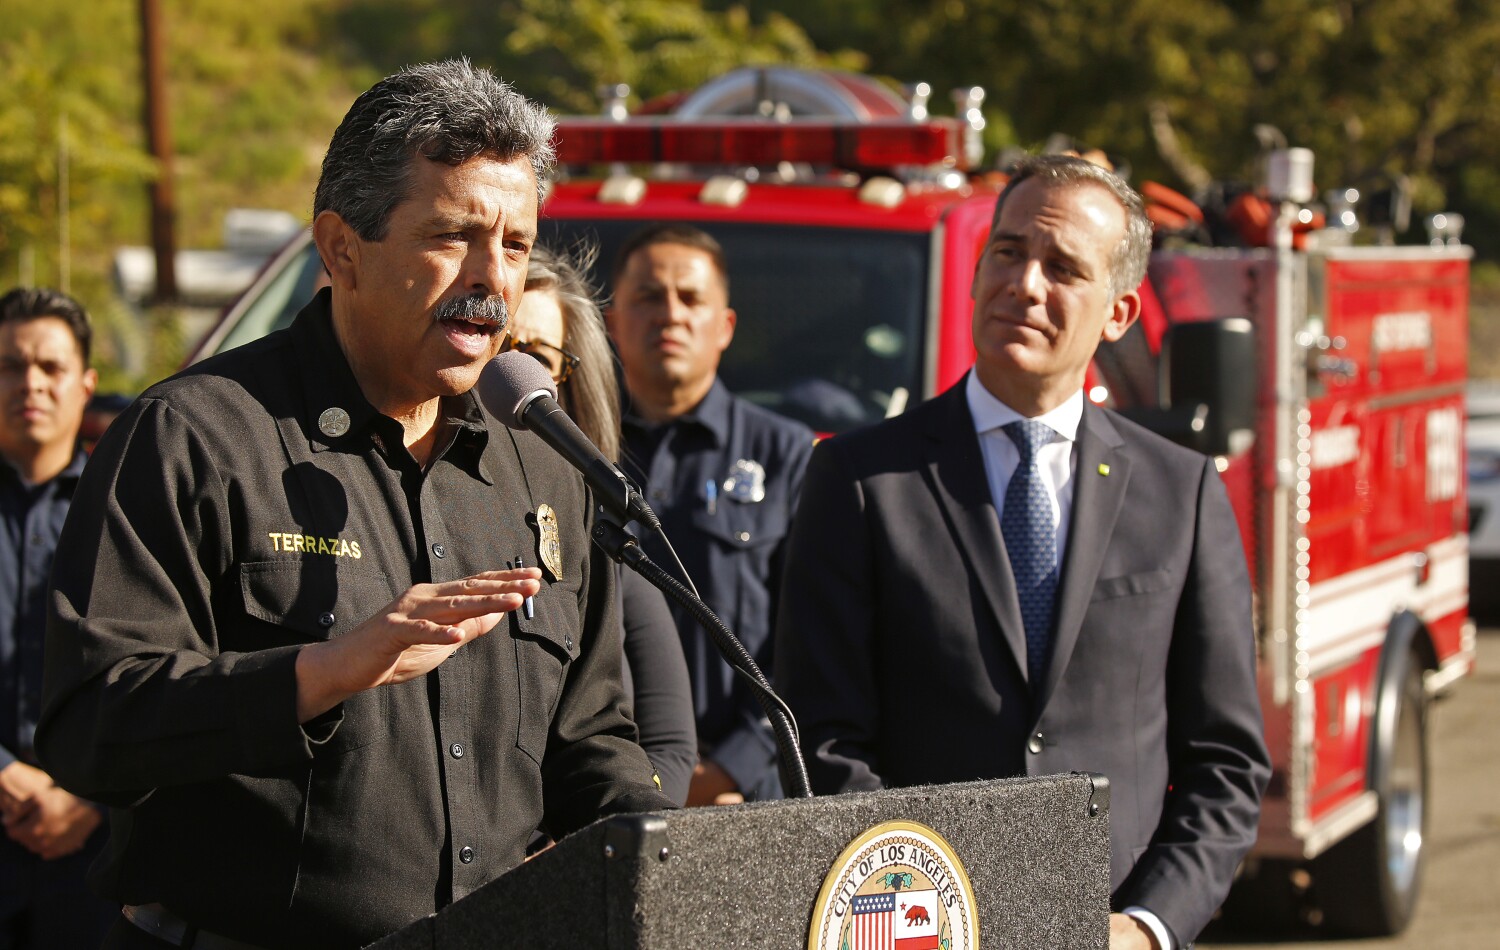 A top LAFD official accessed confidential complaint files while he was under investigation